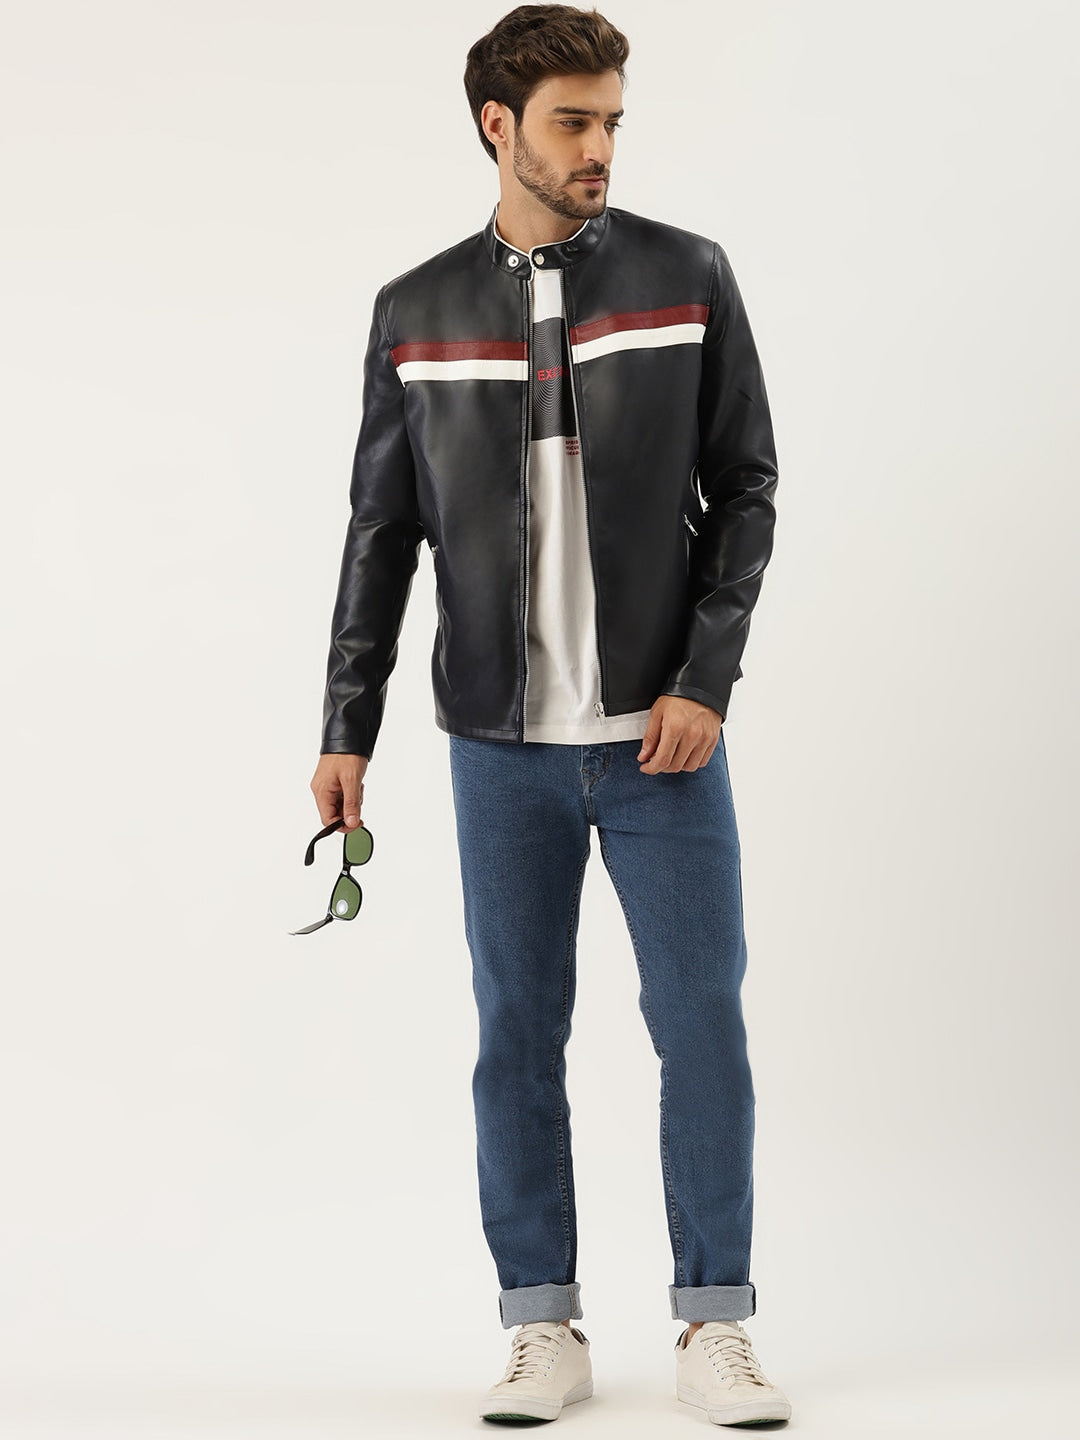 Men Navy Blue Solid Leather Jacket | QAWACH